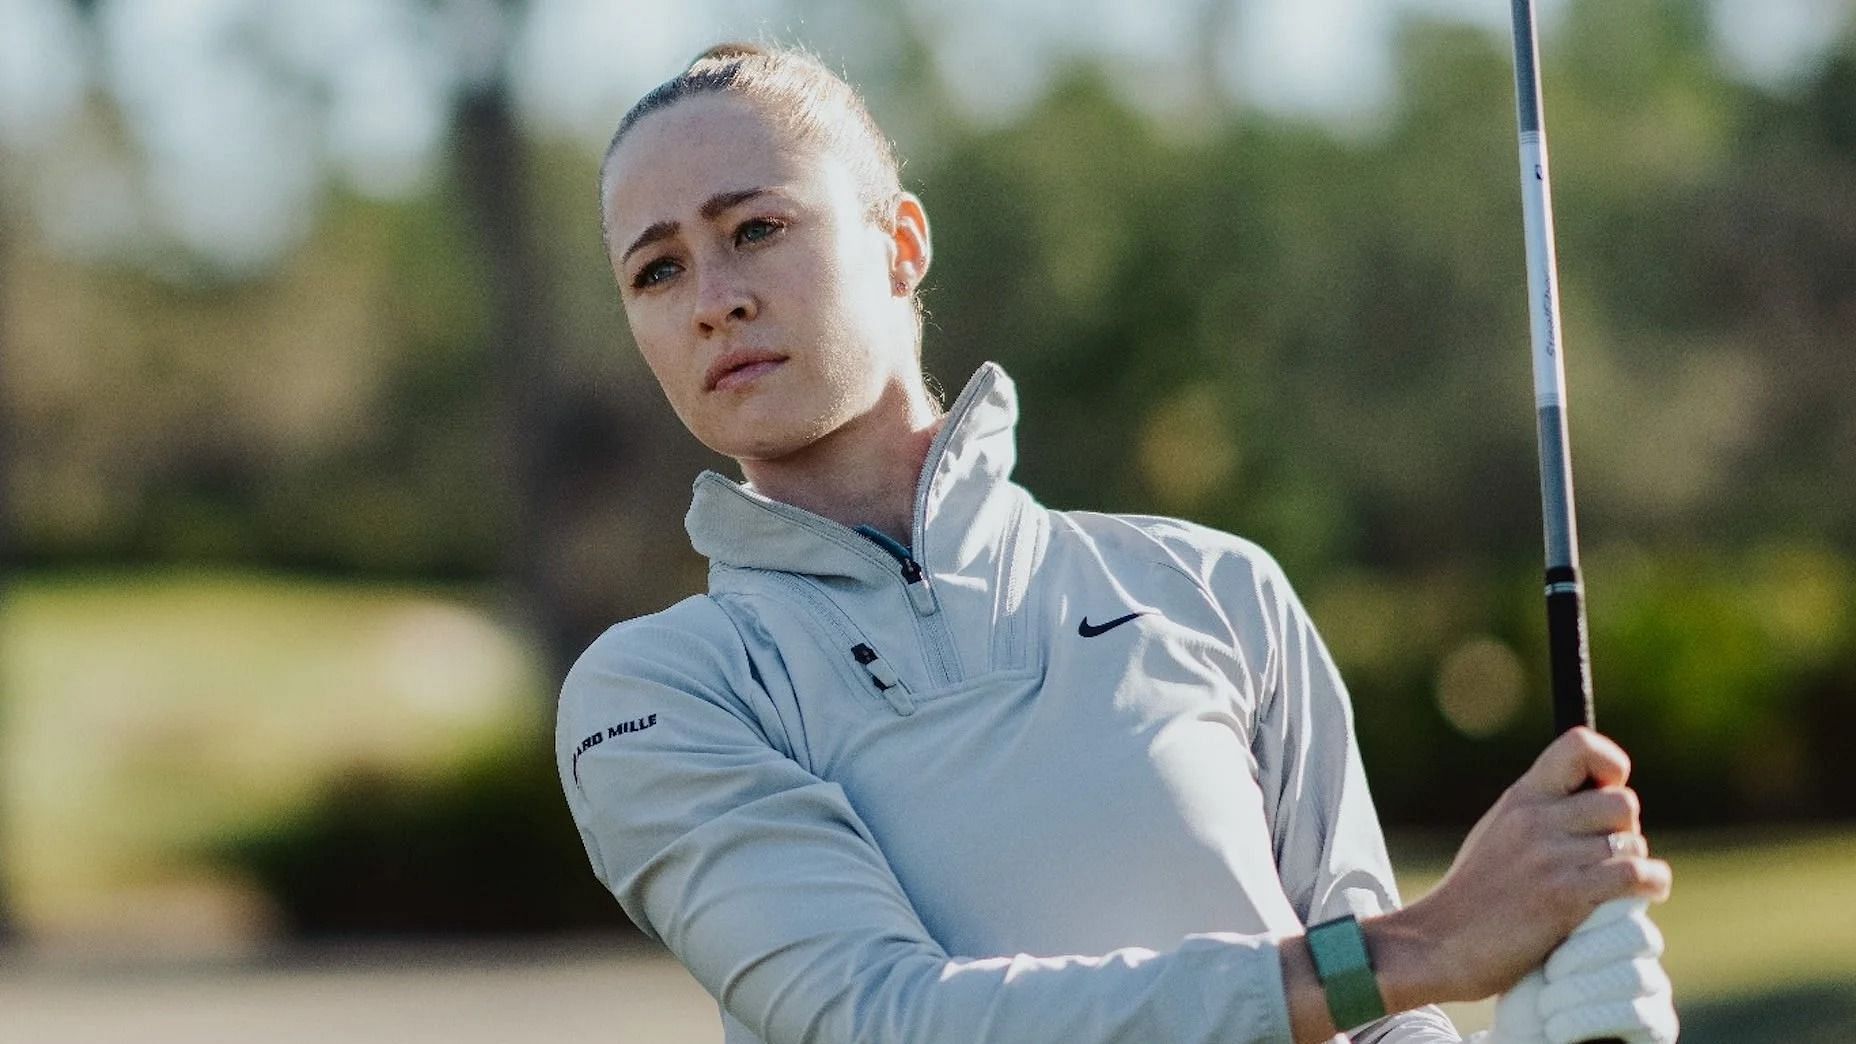 Nelly Korda announced two big deals with Nike and TaylorMade over past few days